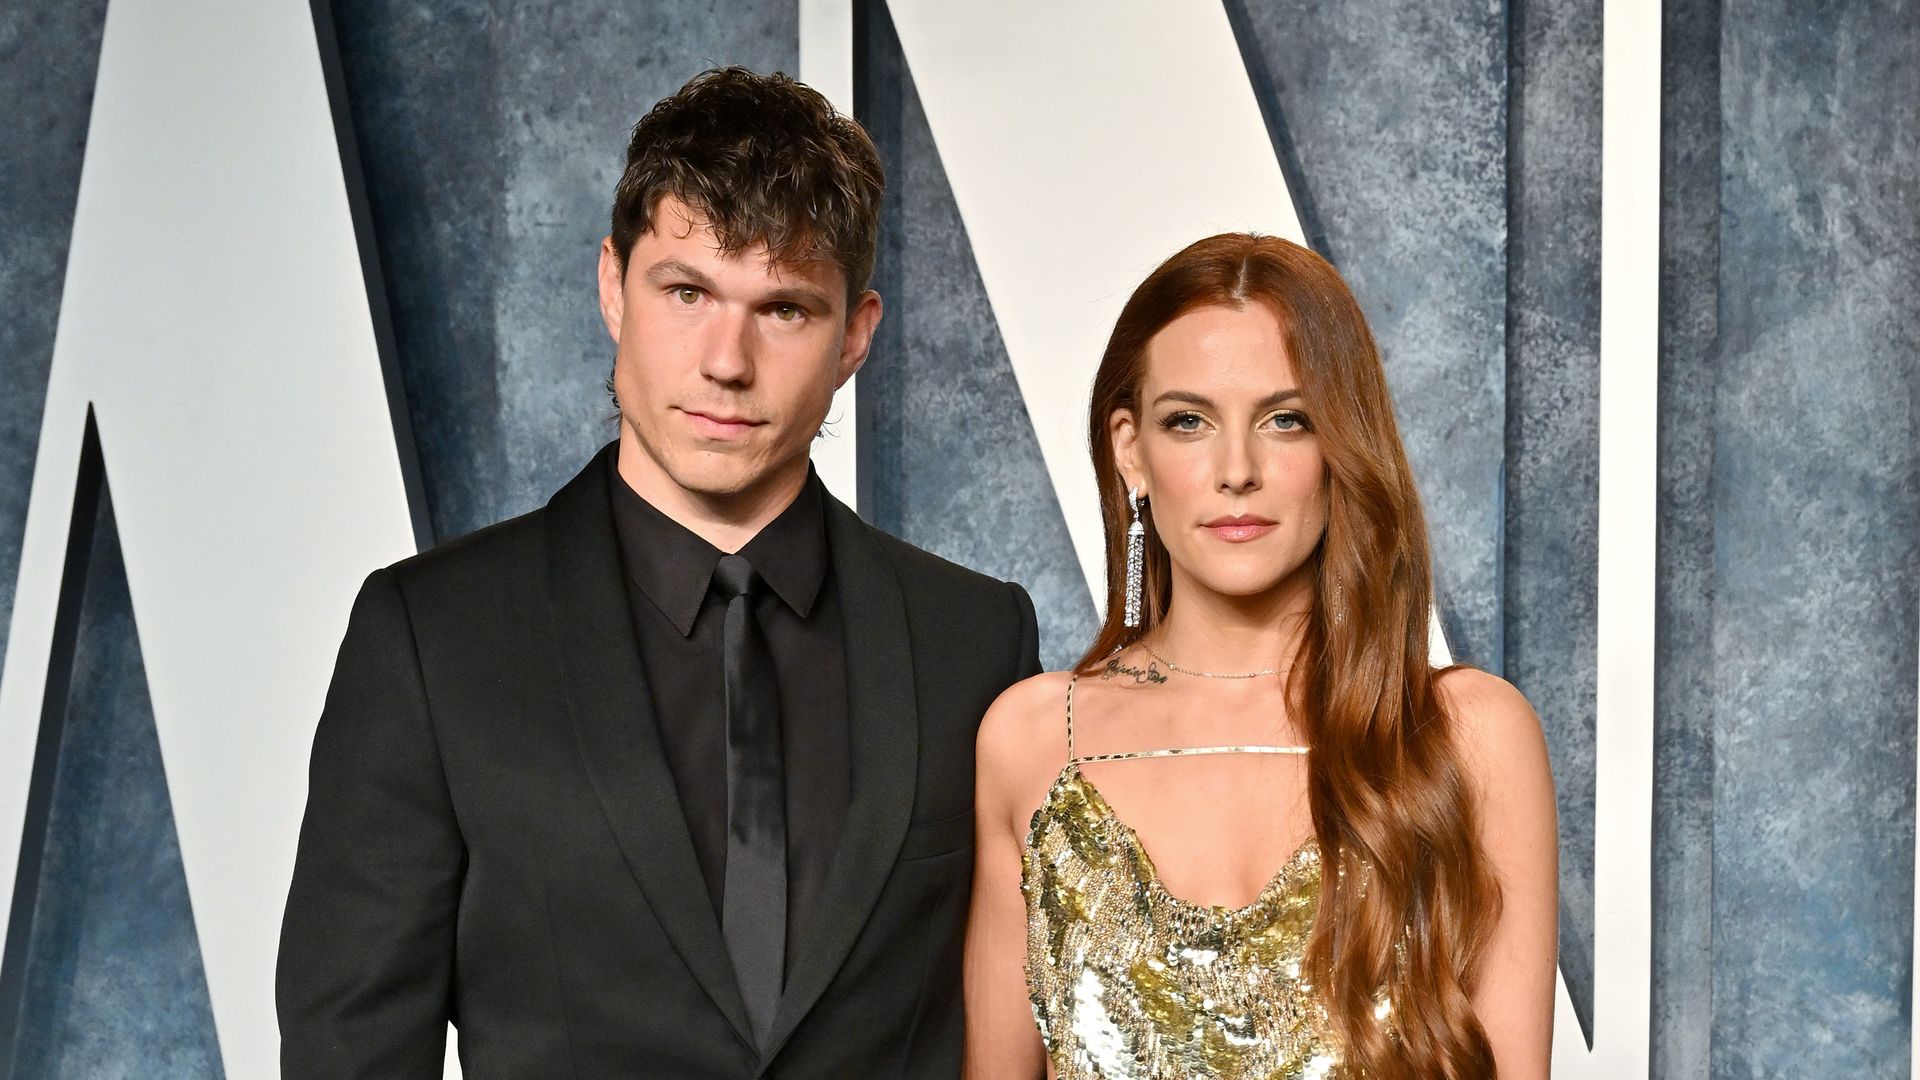 Ben Smith-Petersen and Riley Keough attend the 2023 Vanity Fair Oscar Party hosted by Radhika Jones at Wallis Annenberg Center for the Performing Arts on March 12, 2023 in Beverly Hills, California